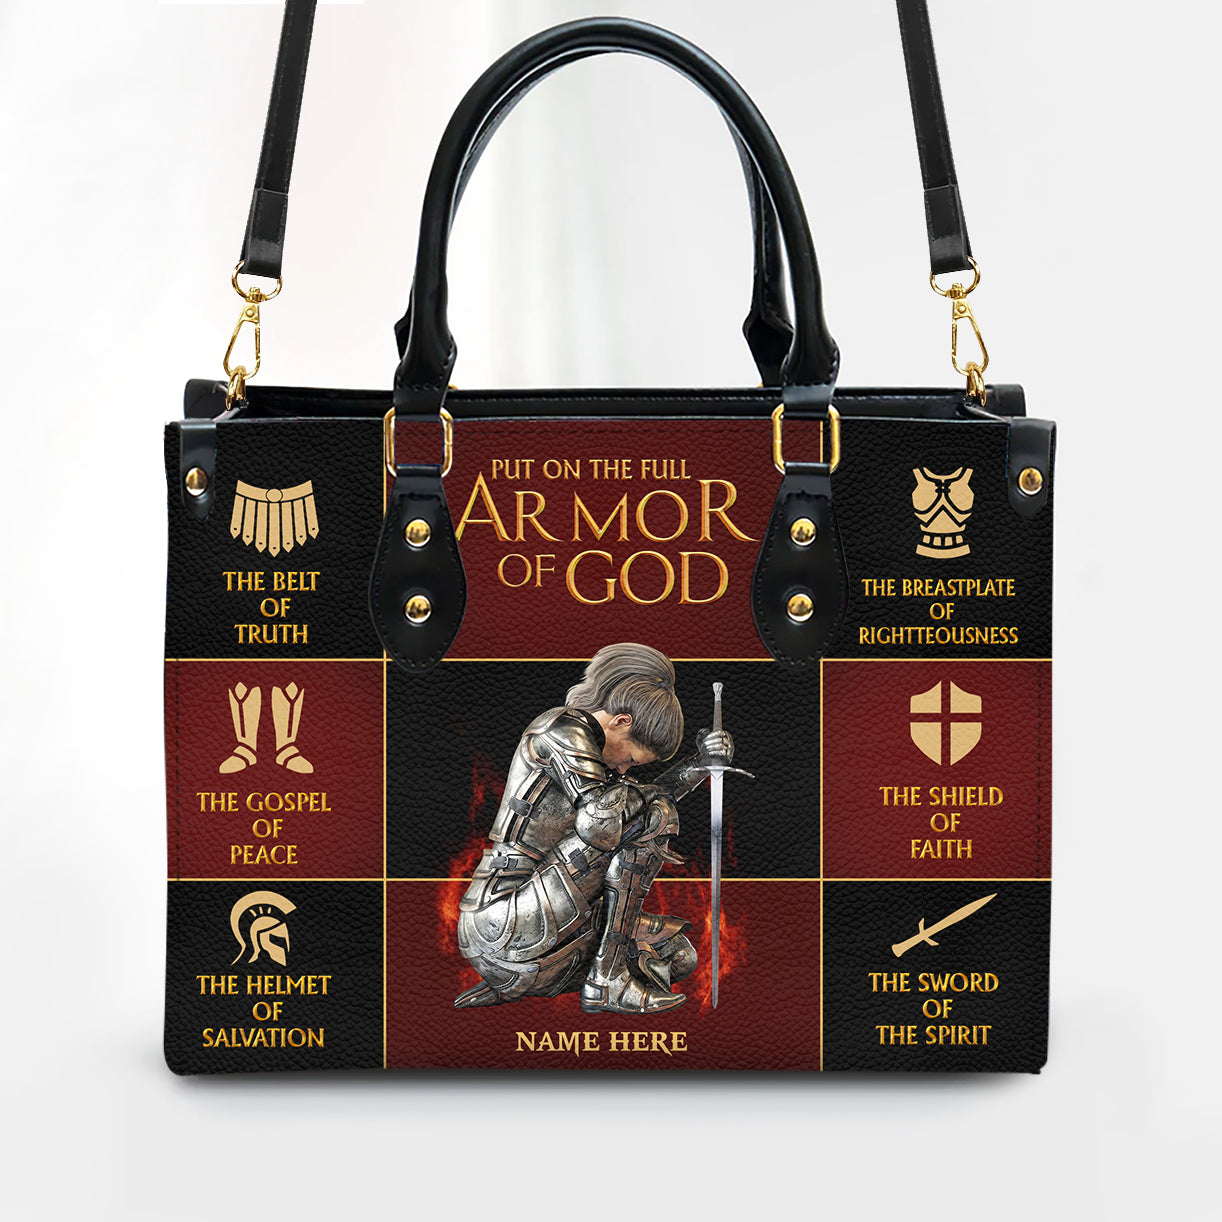 Put On The Full Armor Of God Personalized Leather Handbag PM26JUL23CT1